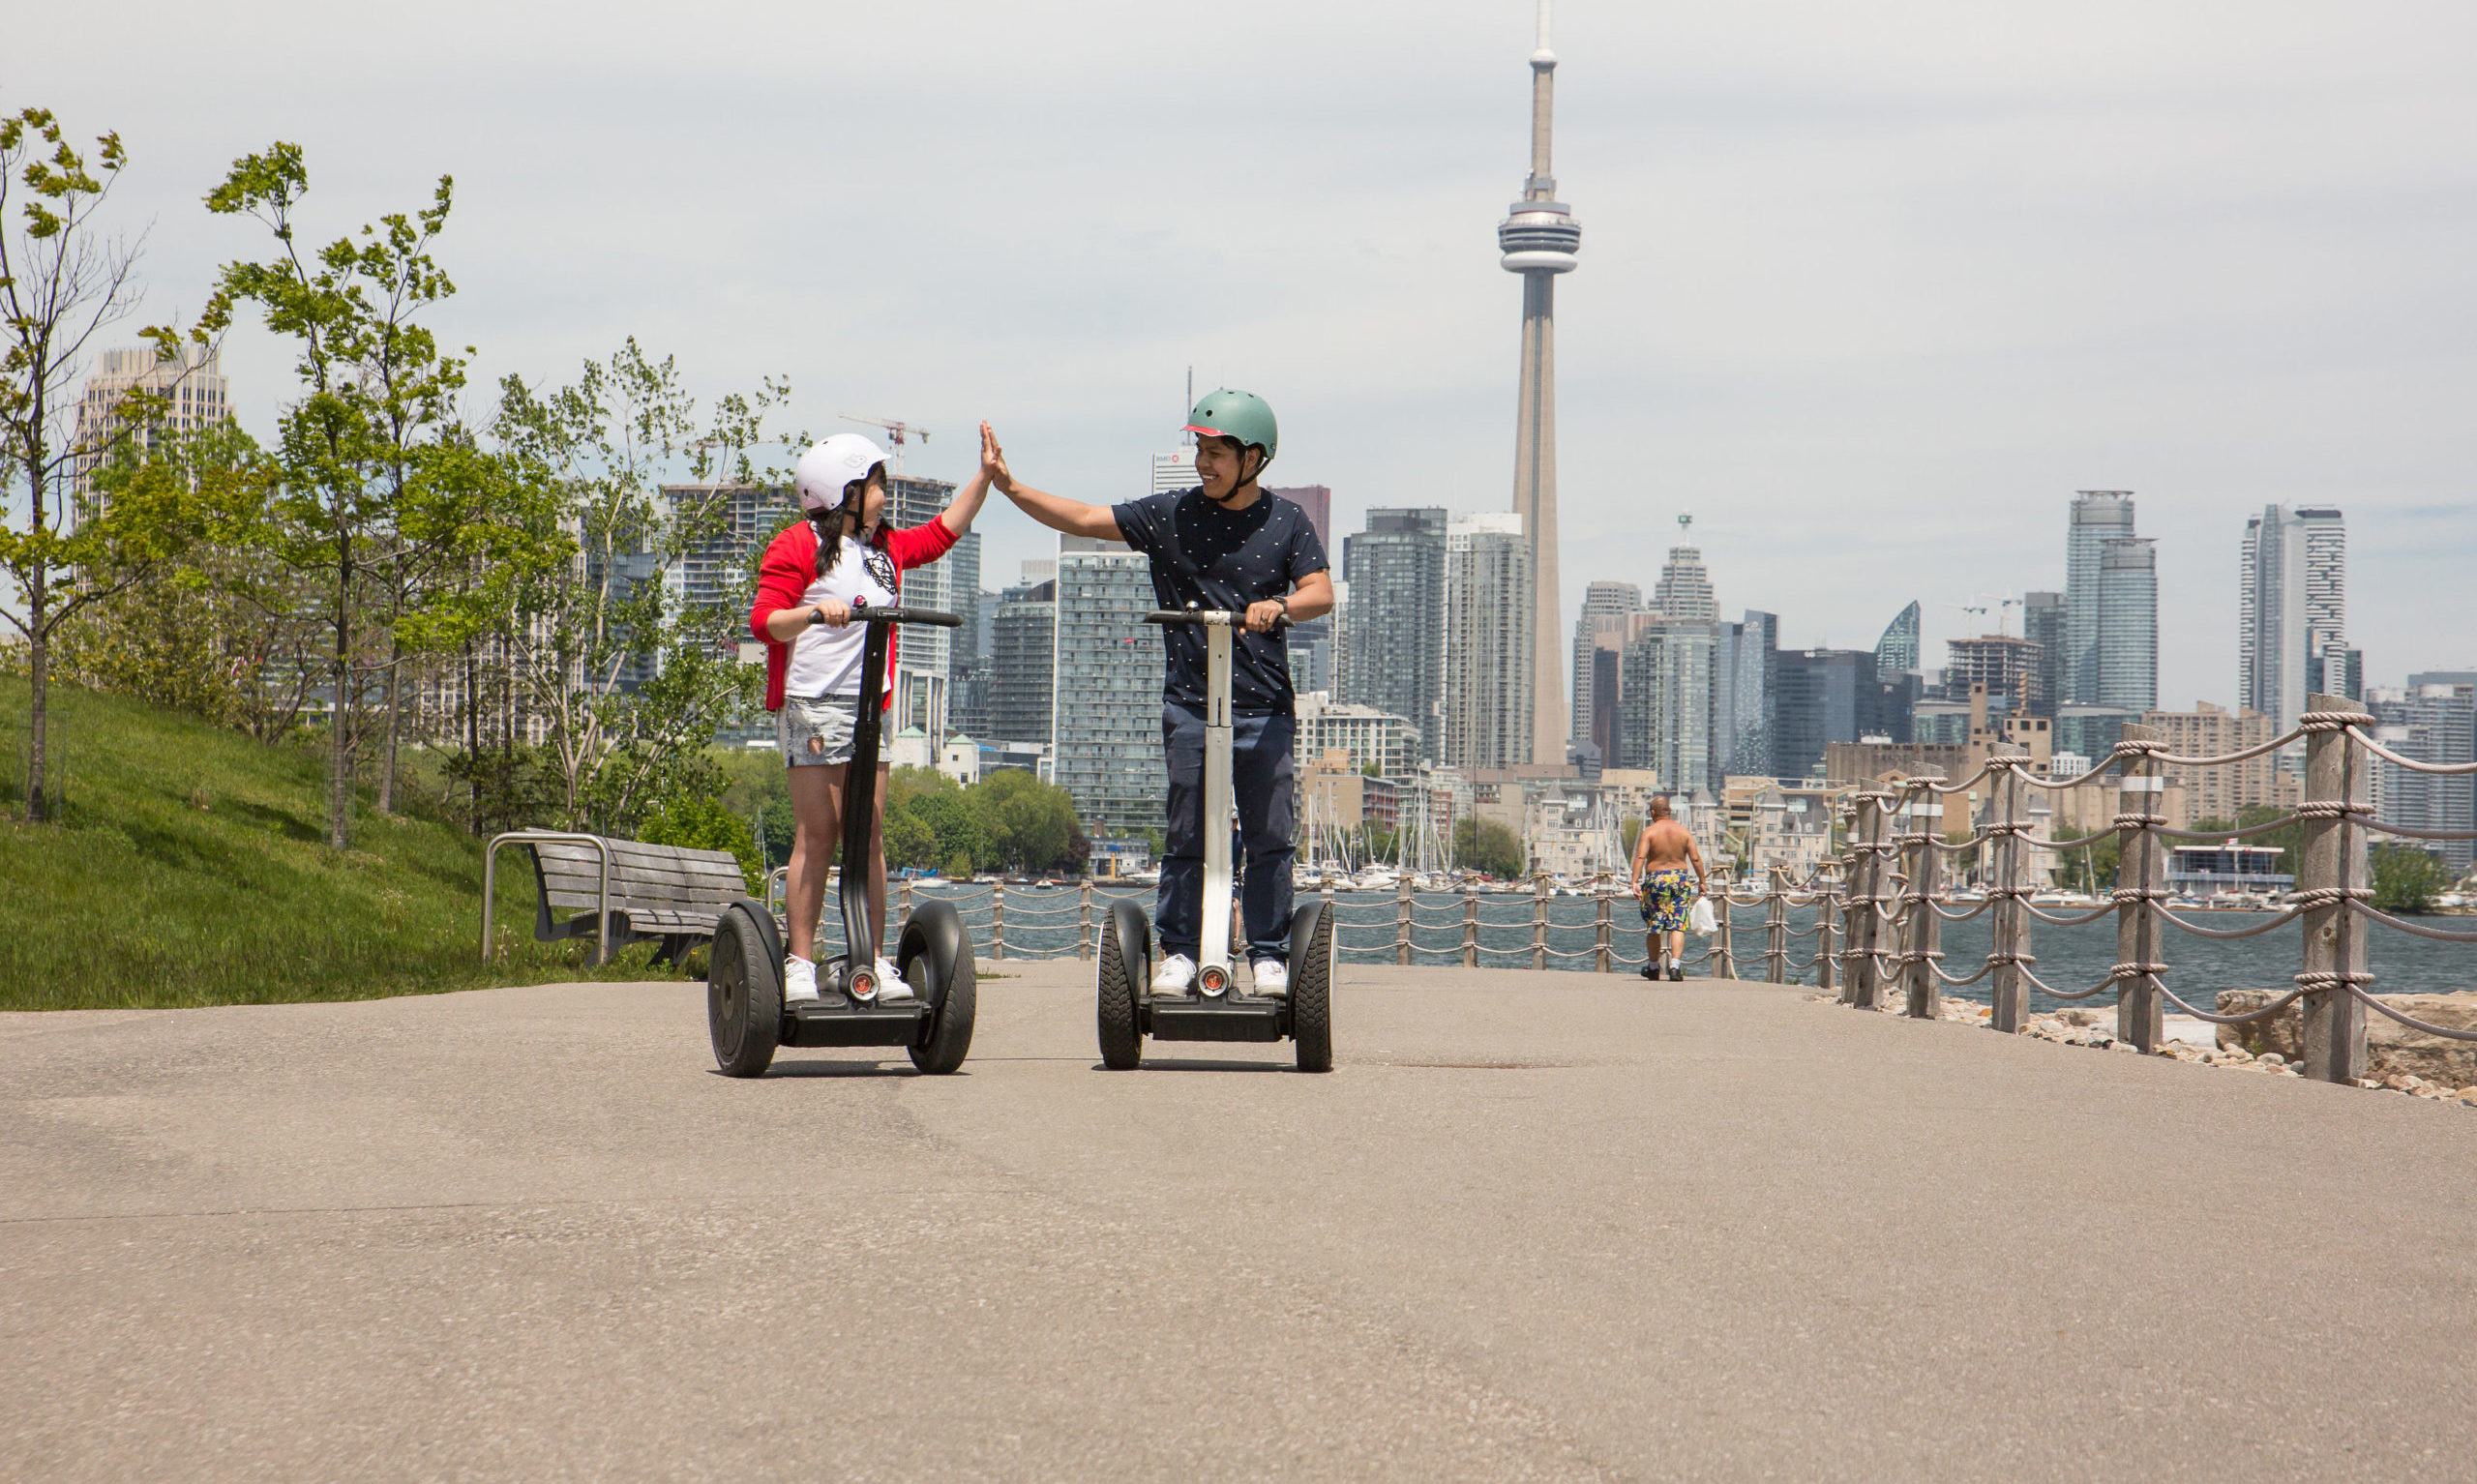 Explore the waterfront by Segway!